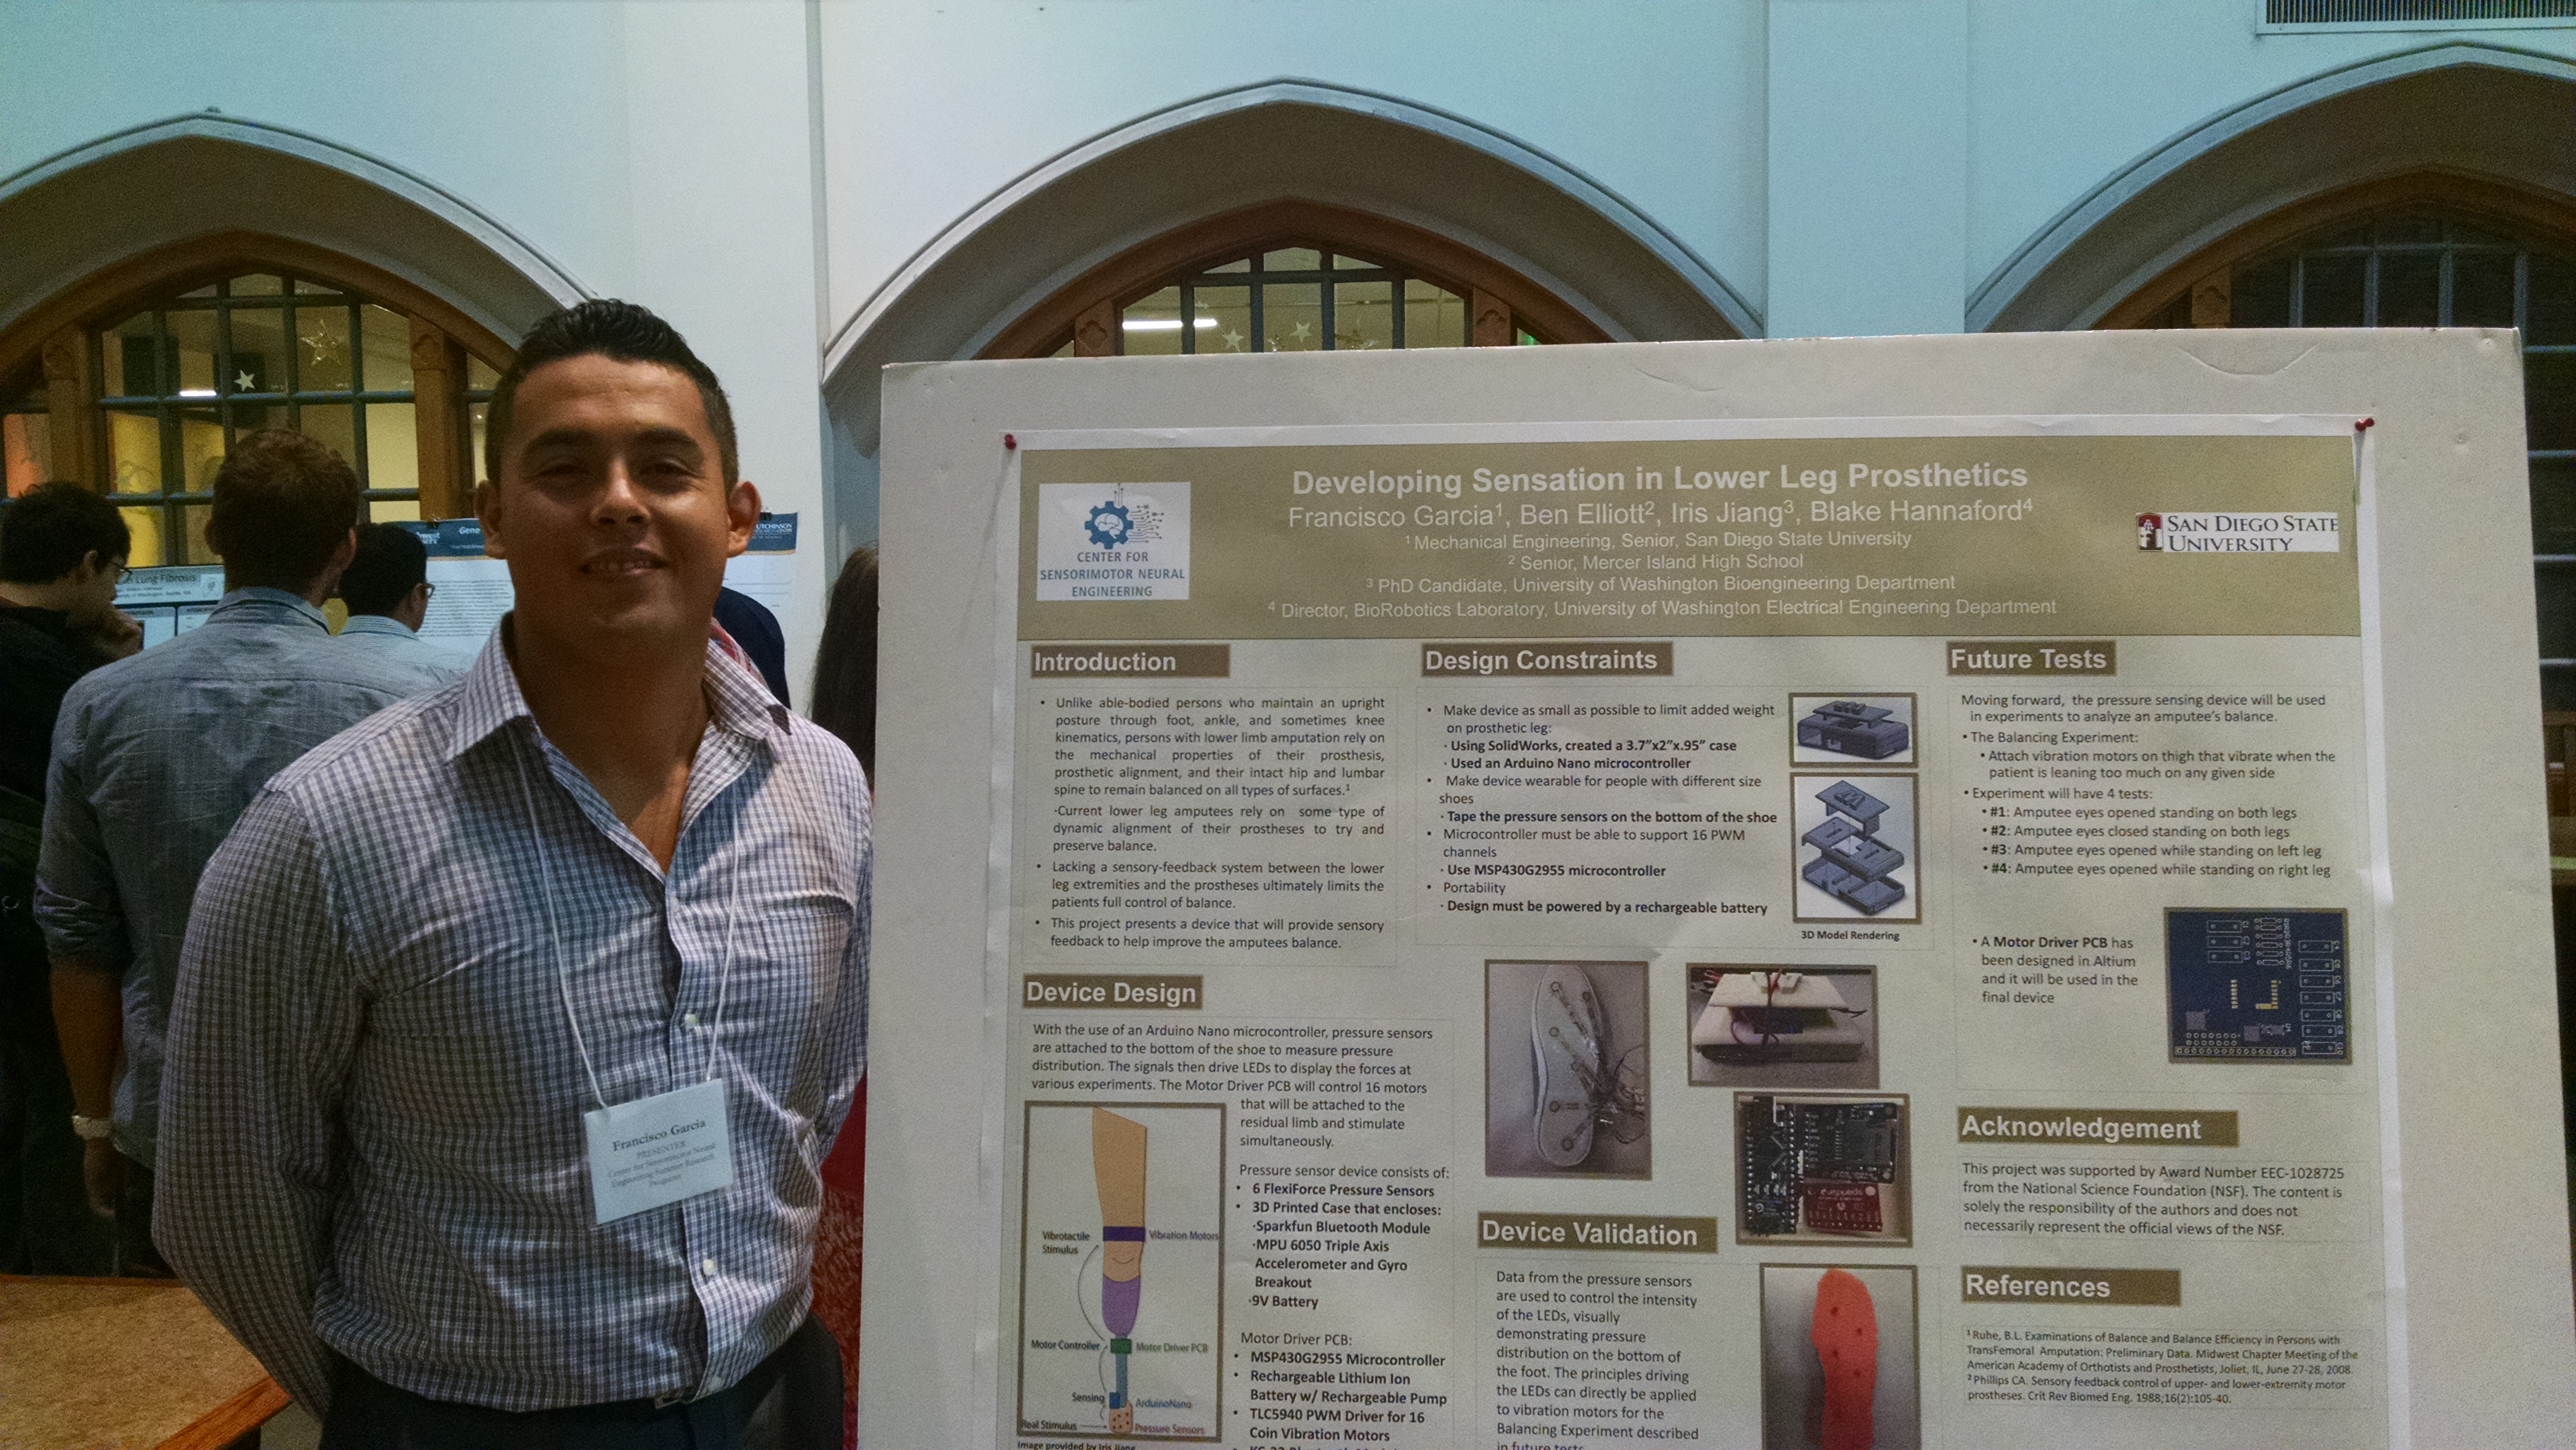 Francisco Garcia, an Mechanical Engineering Undergraduate from SDSU, spent the summer building a system to sense the pressure distribution across the foot in order to provide sensory feedback for prosthetic users.